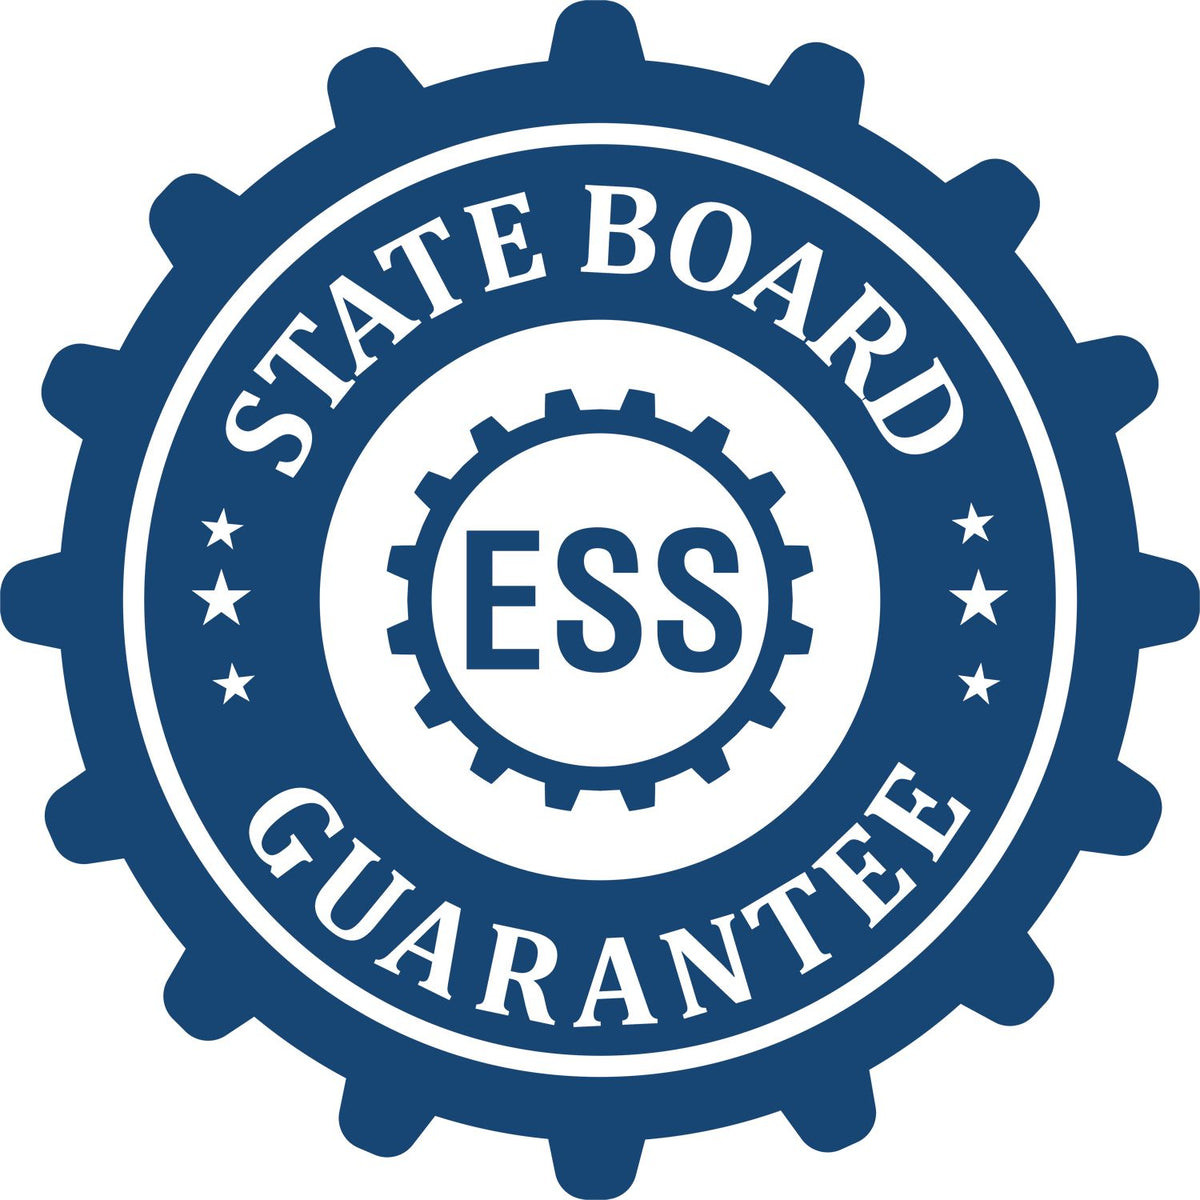 An emblem in a gear shape illustrating a state board guarantee for the Hybrid New York Landscape Architect Seal